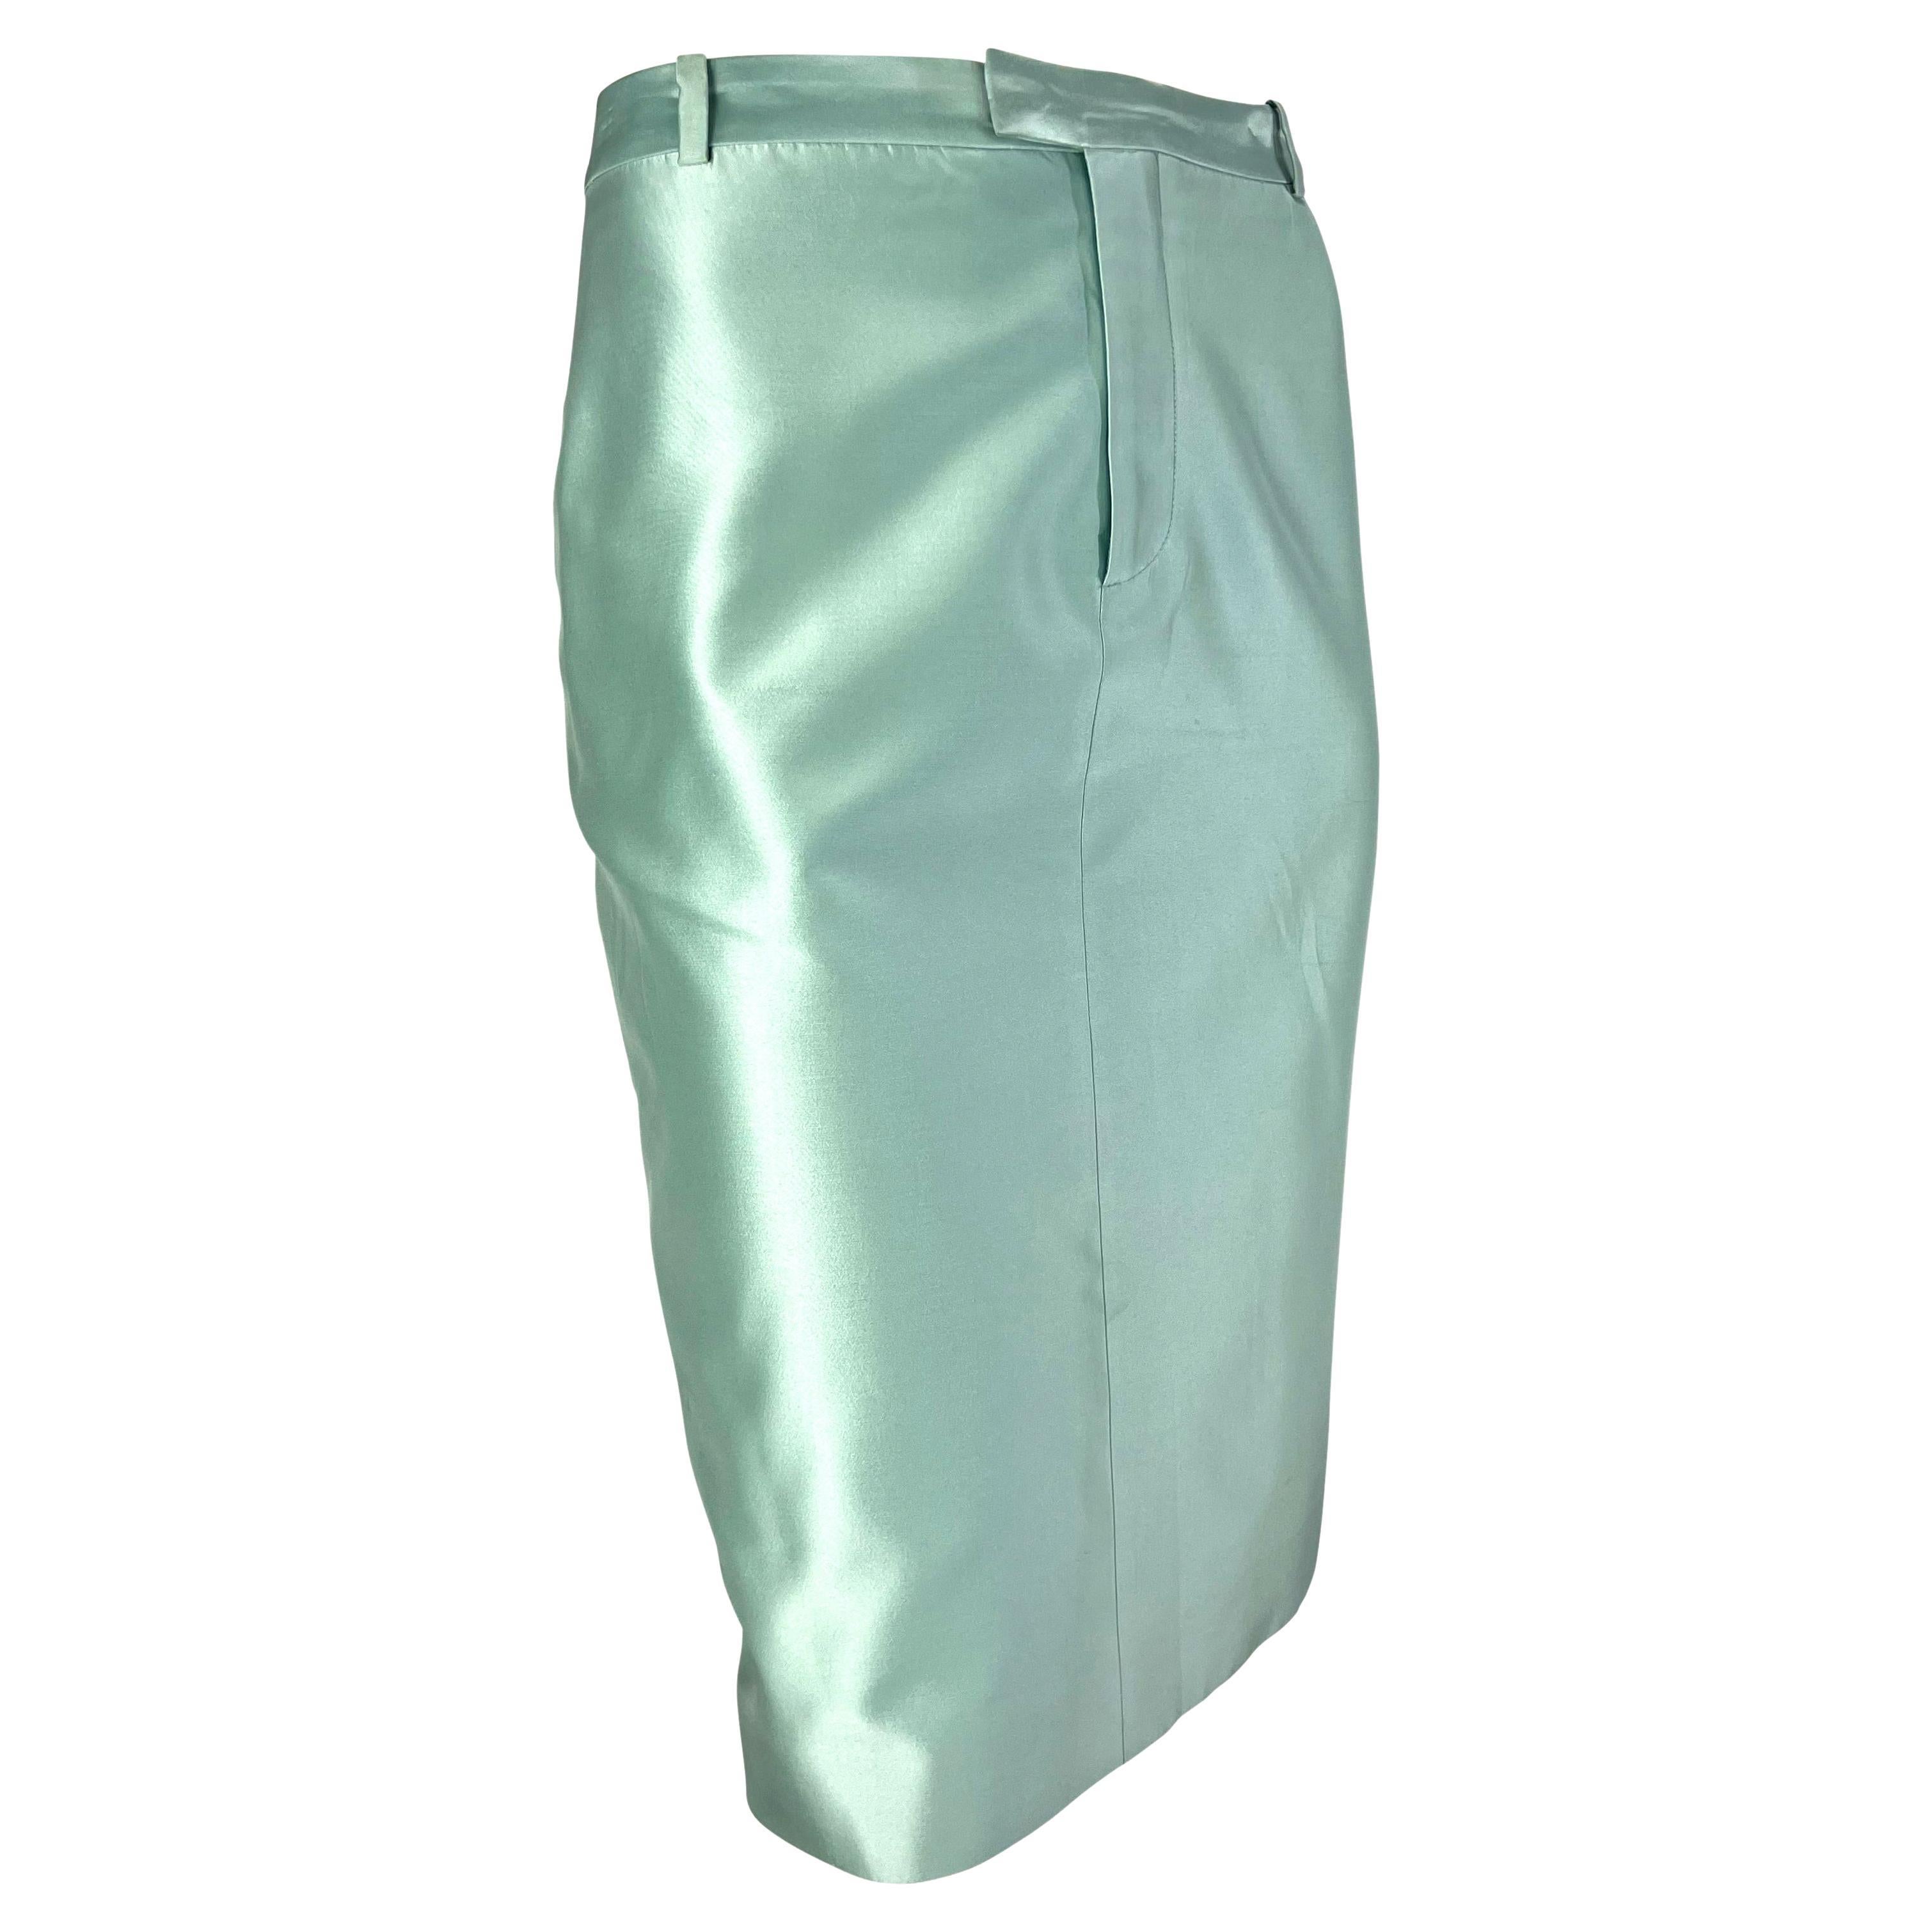 S/S 1998 Gucci by Tom Ford Runway Baby Blue Silk Satin Pencil Skirt For Sale 1